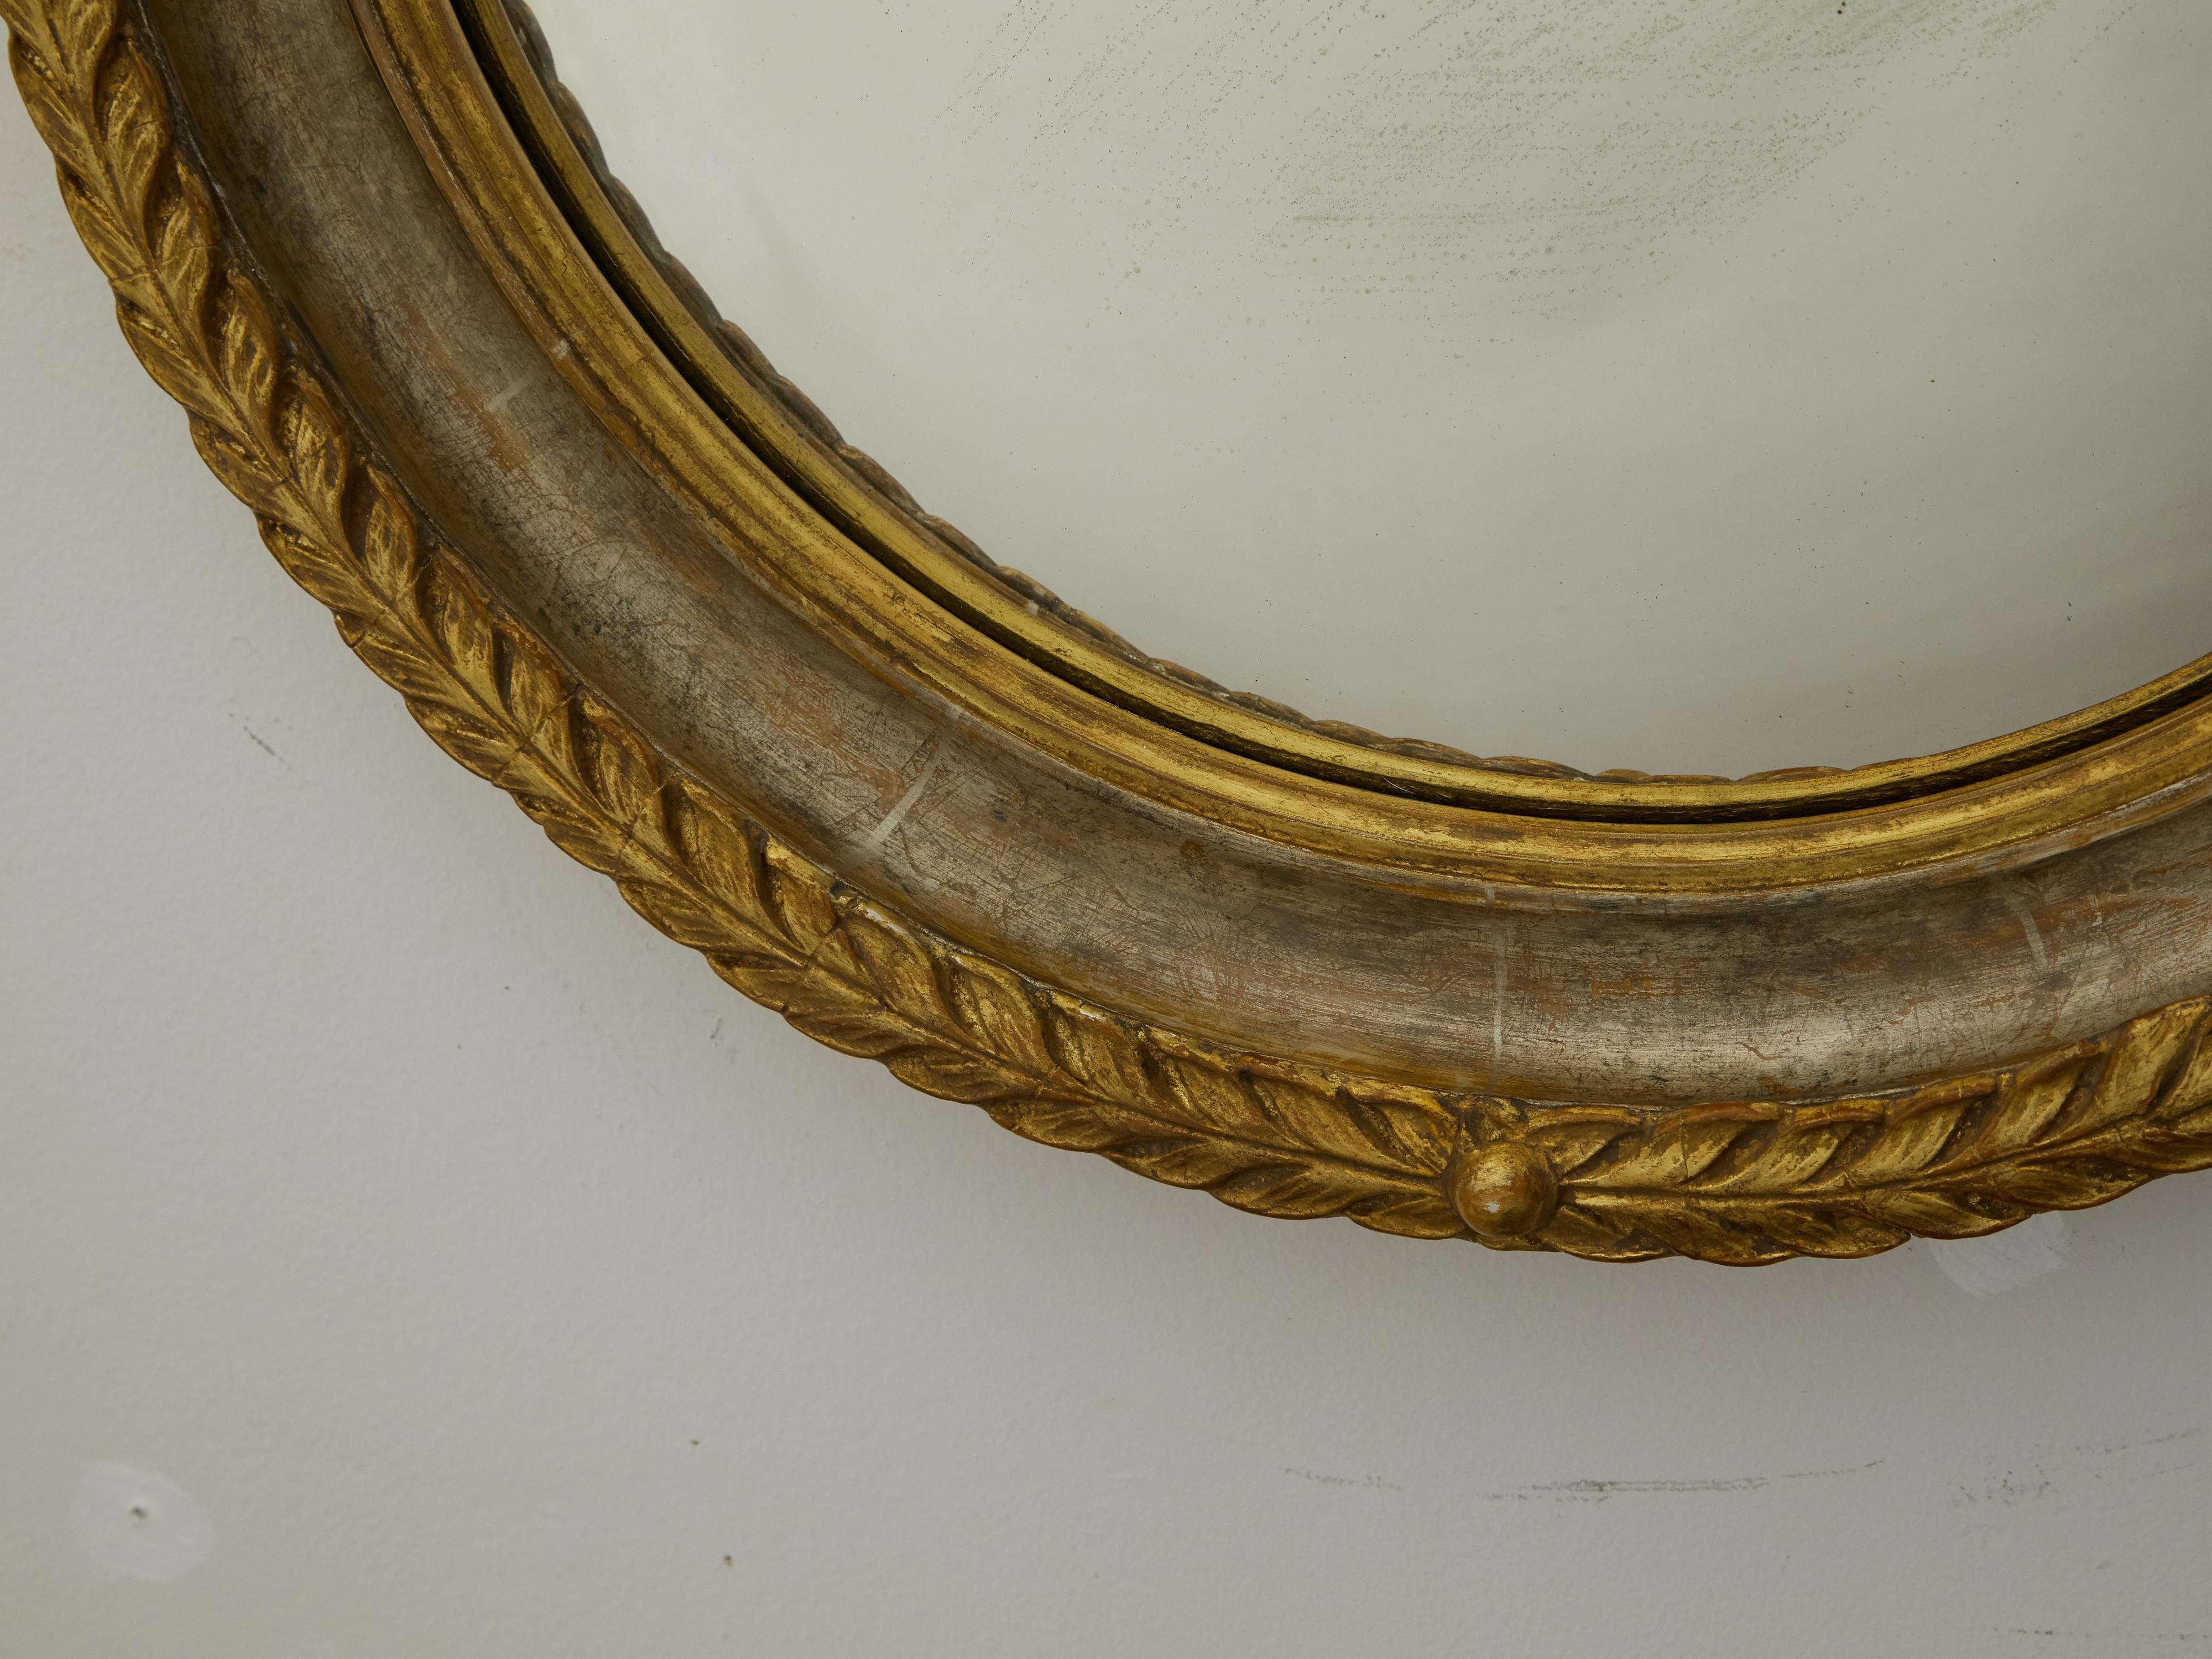 20th Century English 1920s-1930s Carved Wooden Round Mirror with Gilt Accents and Foliage